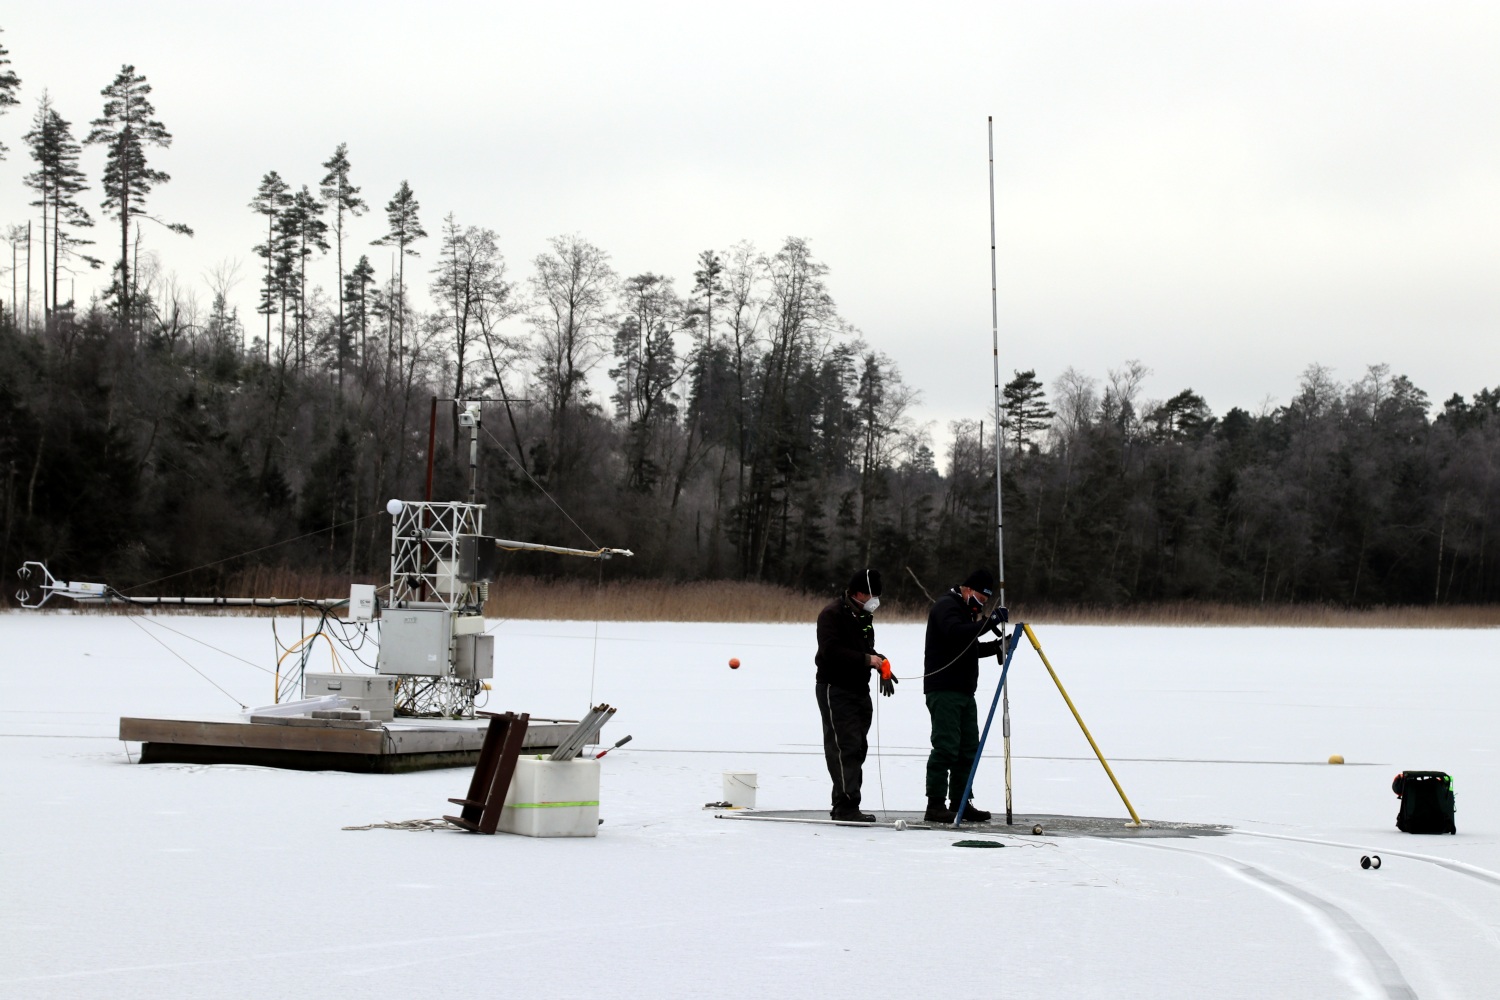 Two master students, Fredrik Andersson and Tobias Möhl, participated in the sampling. Here they are pulling the geo-radar (Malå Geoscience Ramac) equipment over the ice. Photo: Leif Klemedtsson.